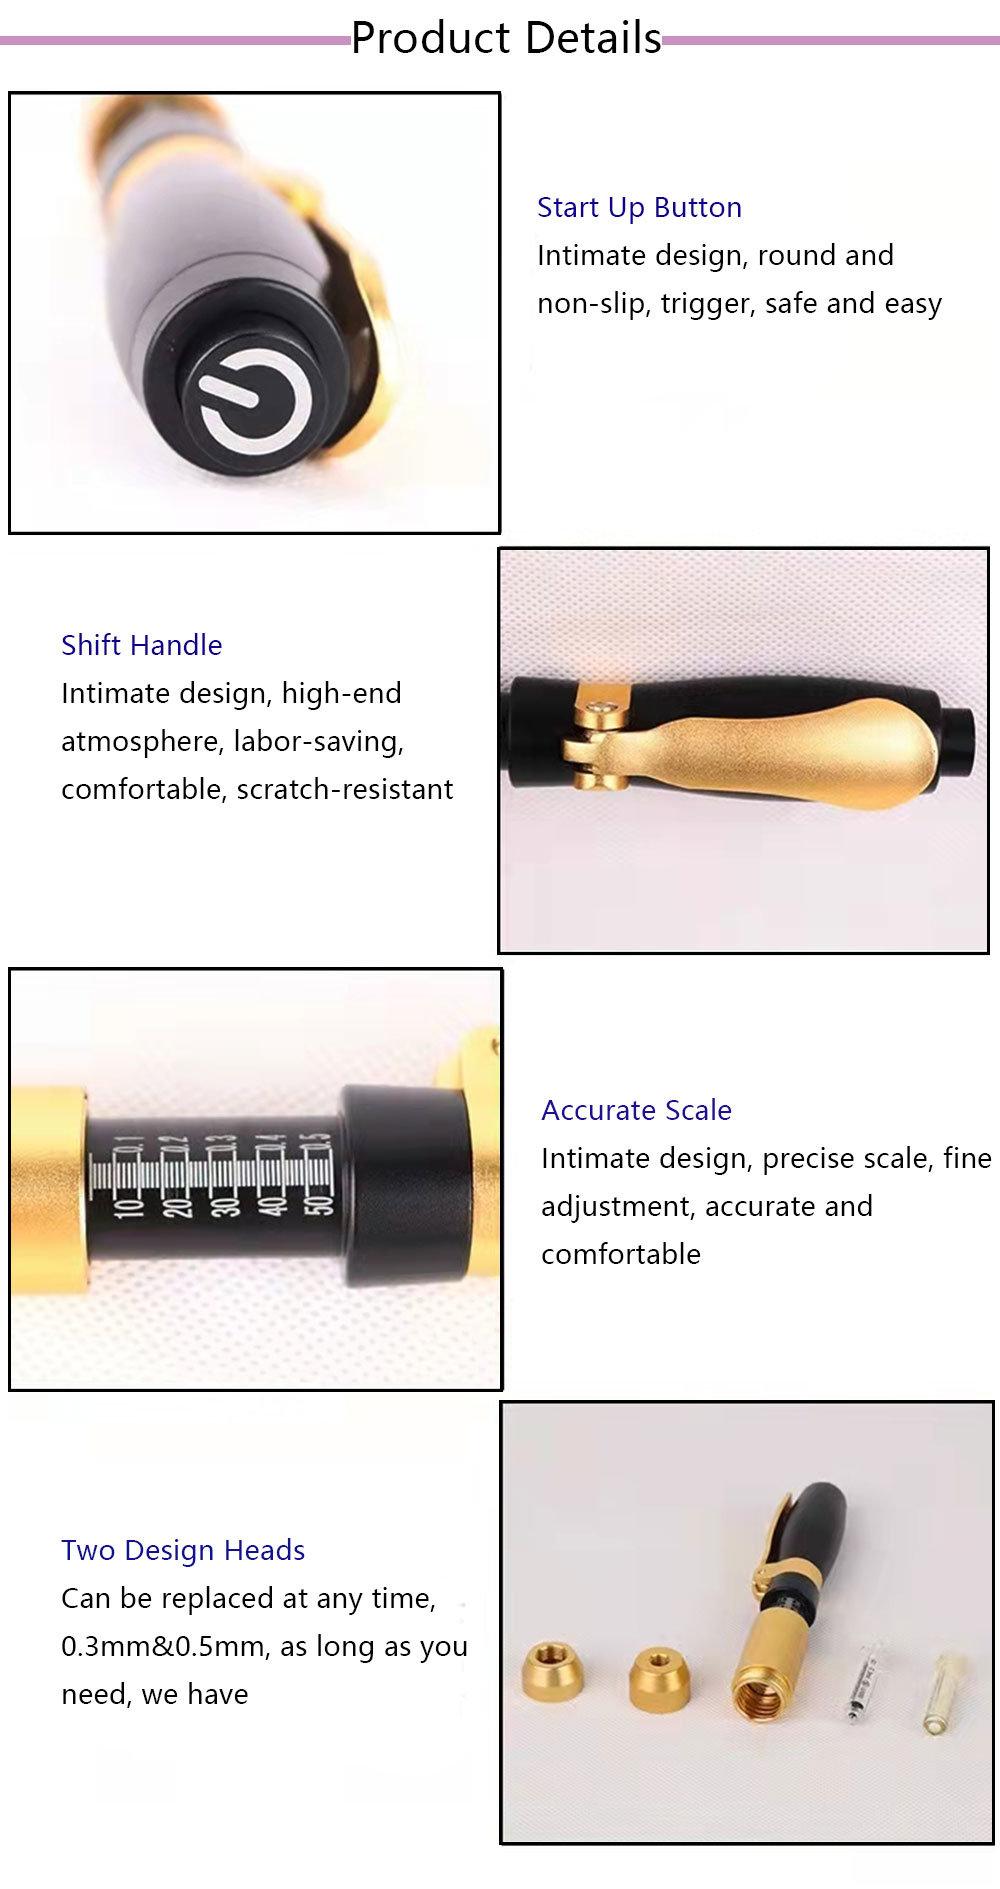 Factory Price No-Needle Hyaluronic Injection Salons Use Hyaluronic Pen